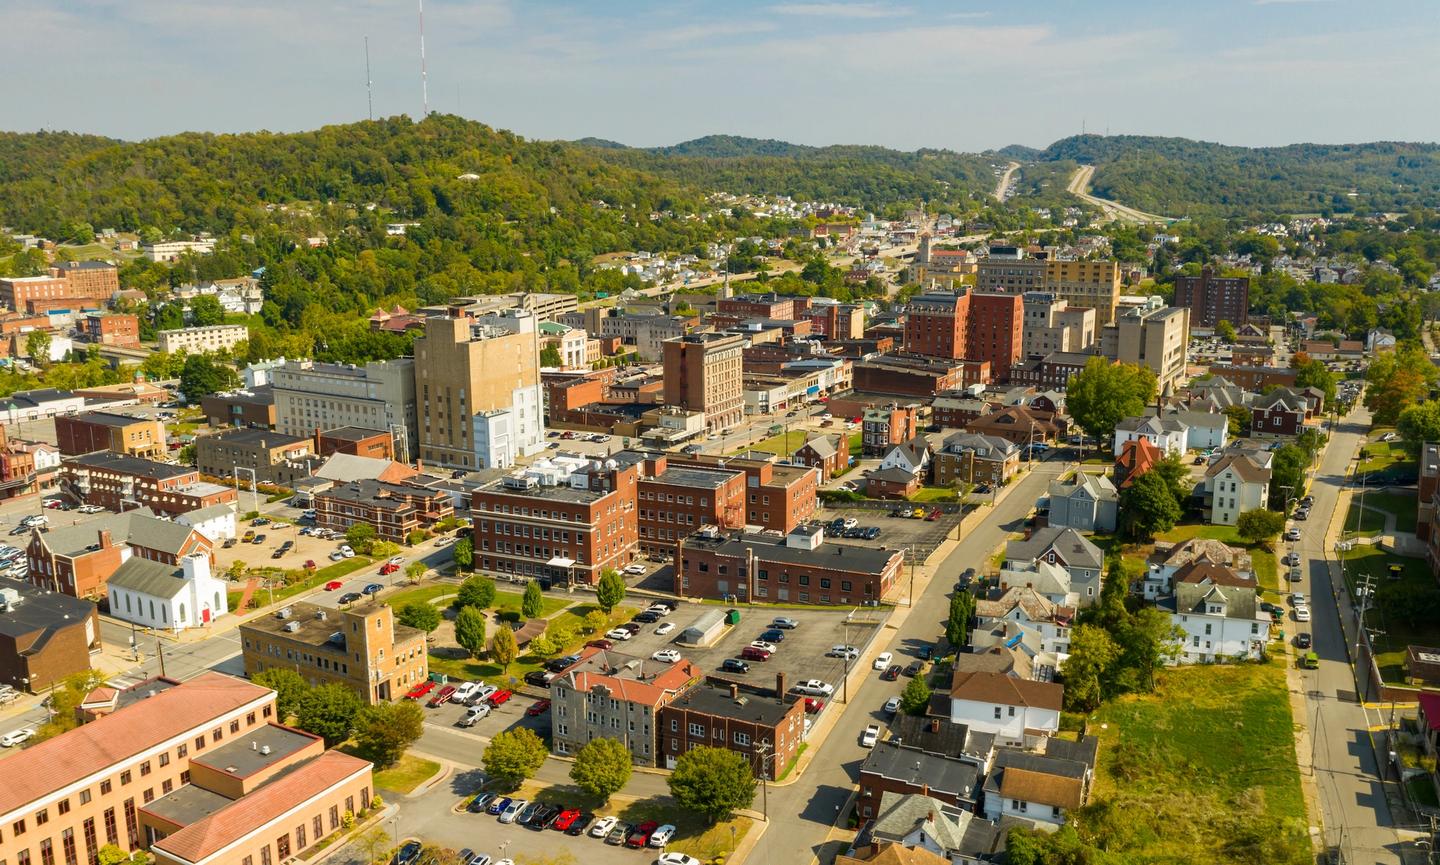 Downtown Clarksburg offers mountain views and a well-preserved historical area. 